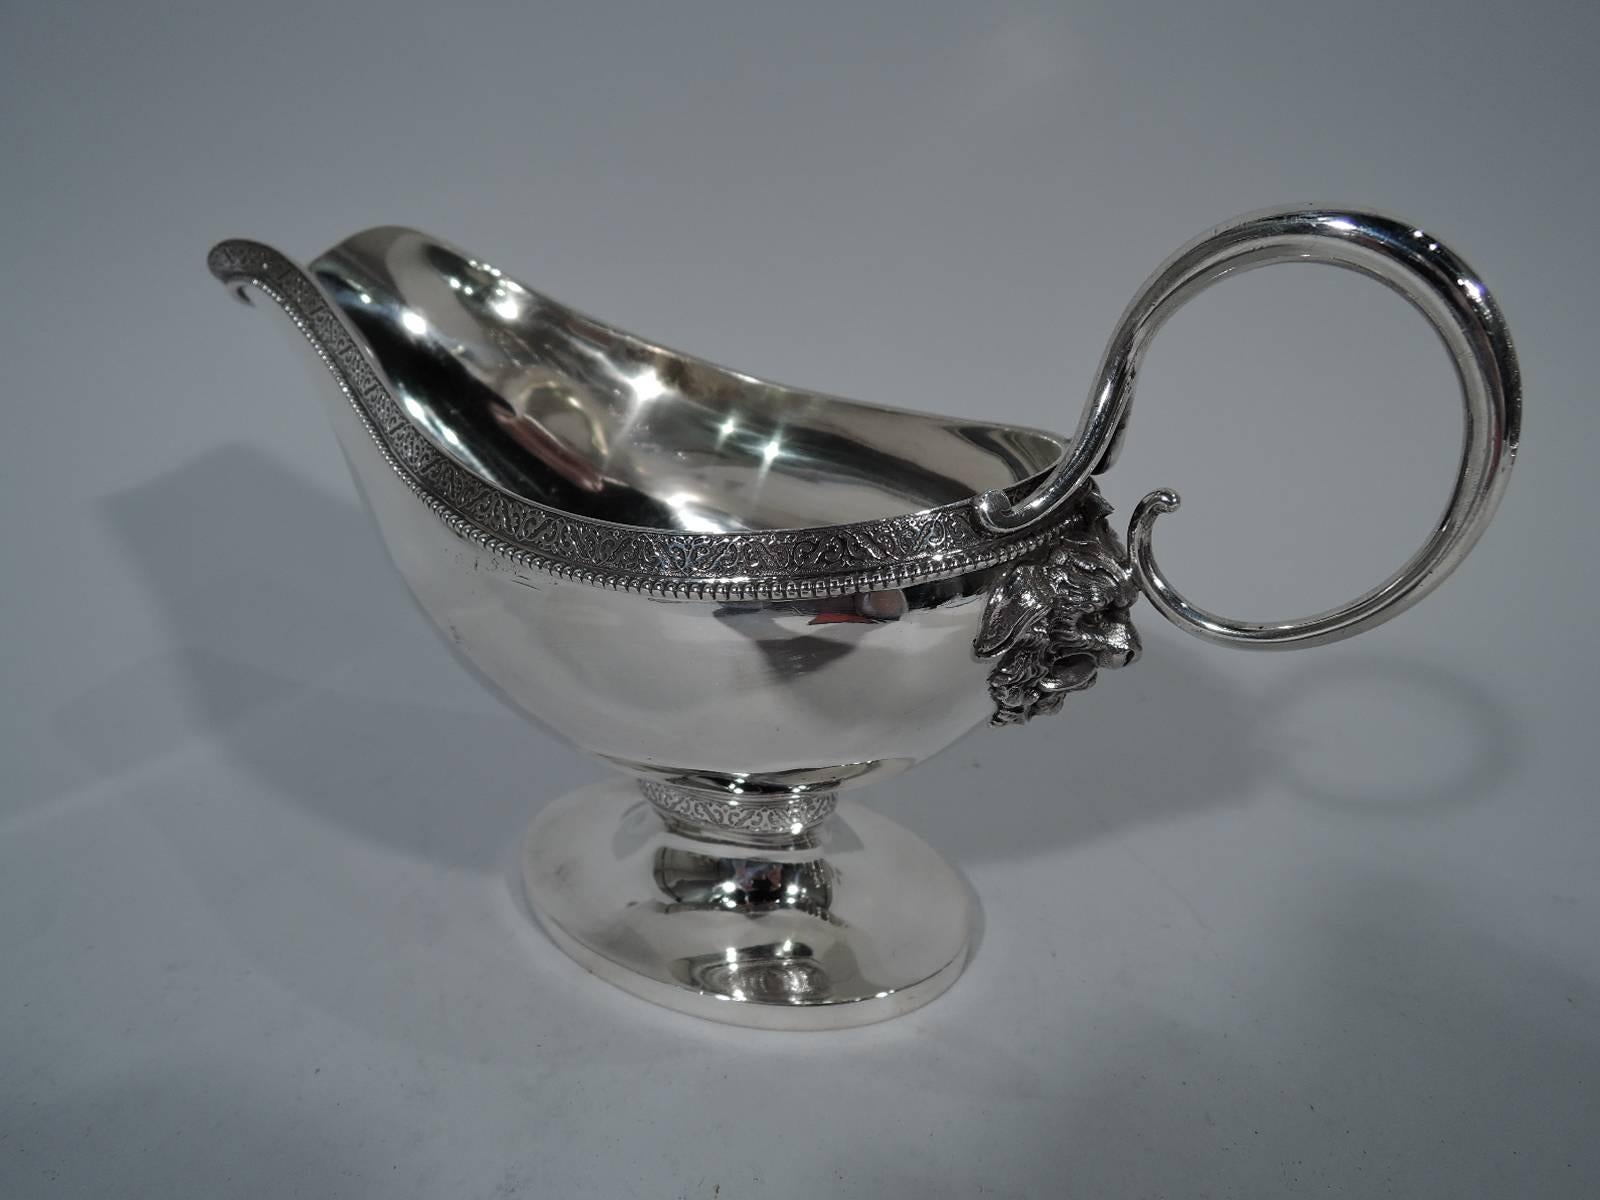 Classical sterling silver gravy boat. Made by Gorham in Providence in 1871. Curved body with helmet mouth, raised oval foot, and loop handle with mask mount. Raised rinceaux on stippled ground and beading. Hallmark includes date letter and no. 112.